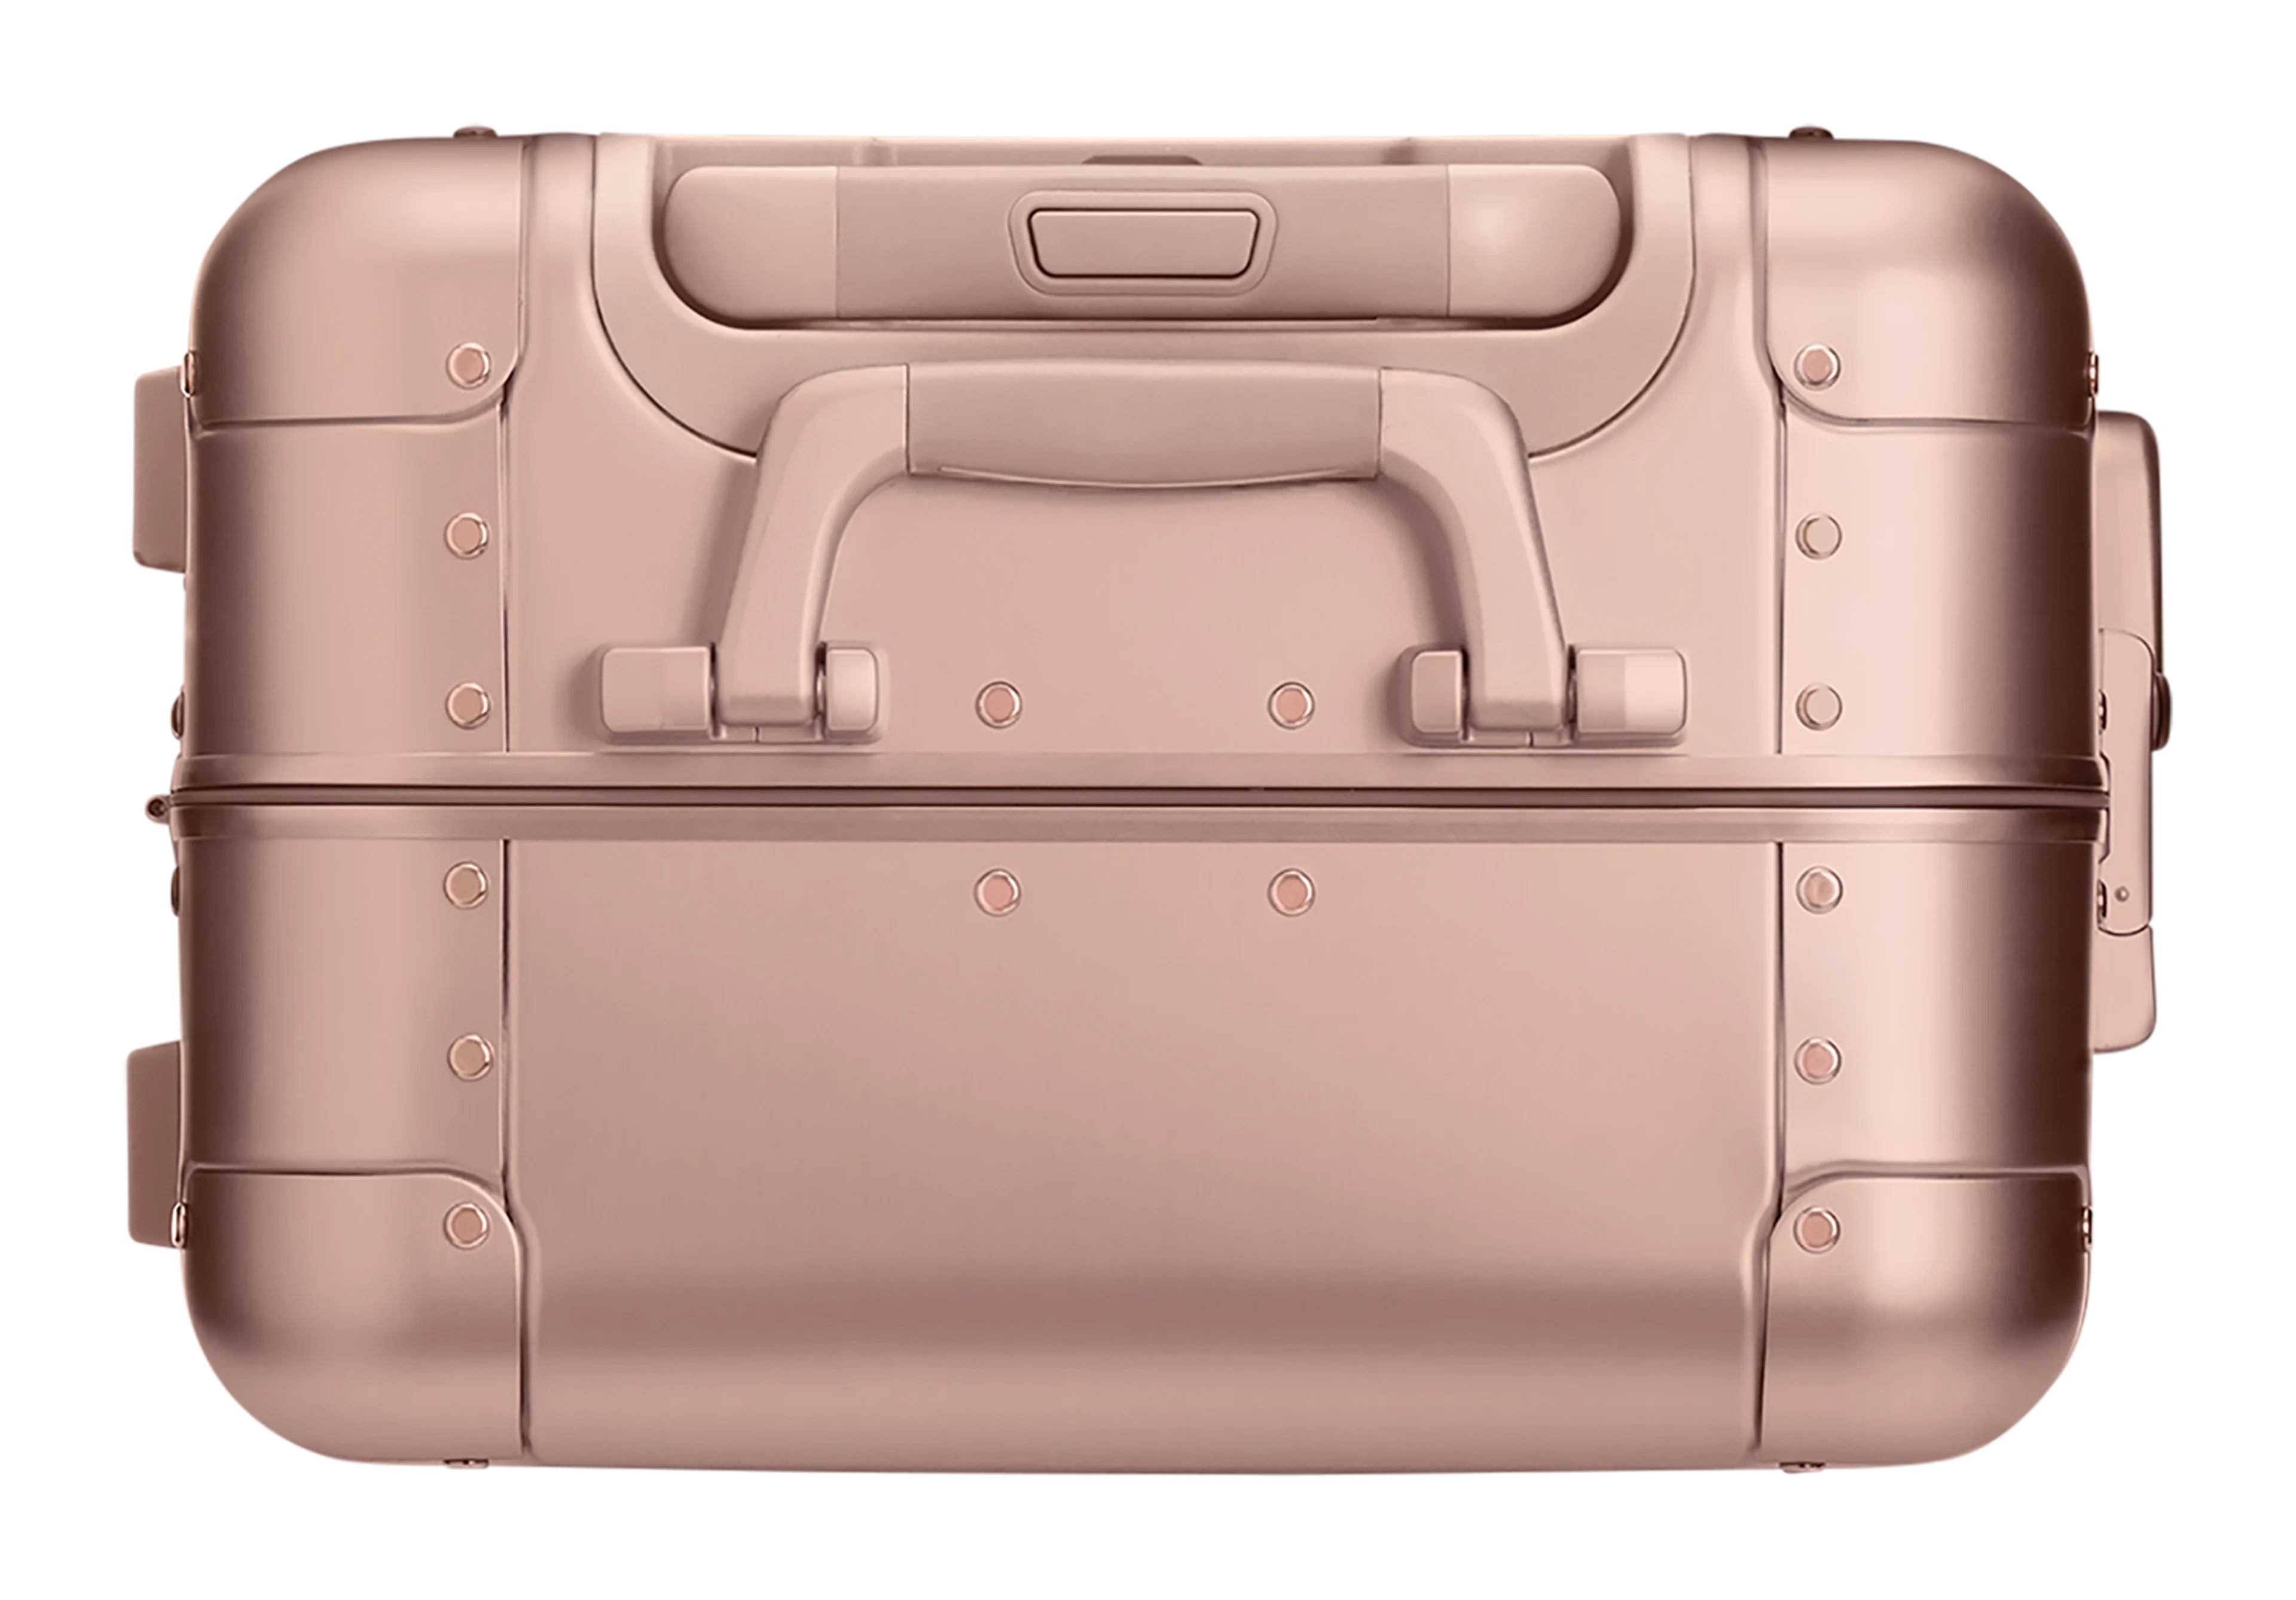 The Aluminum Carry-On in Rose Gold